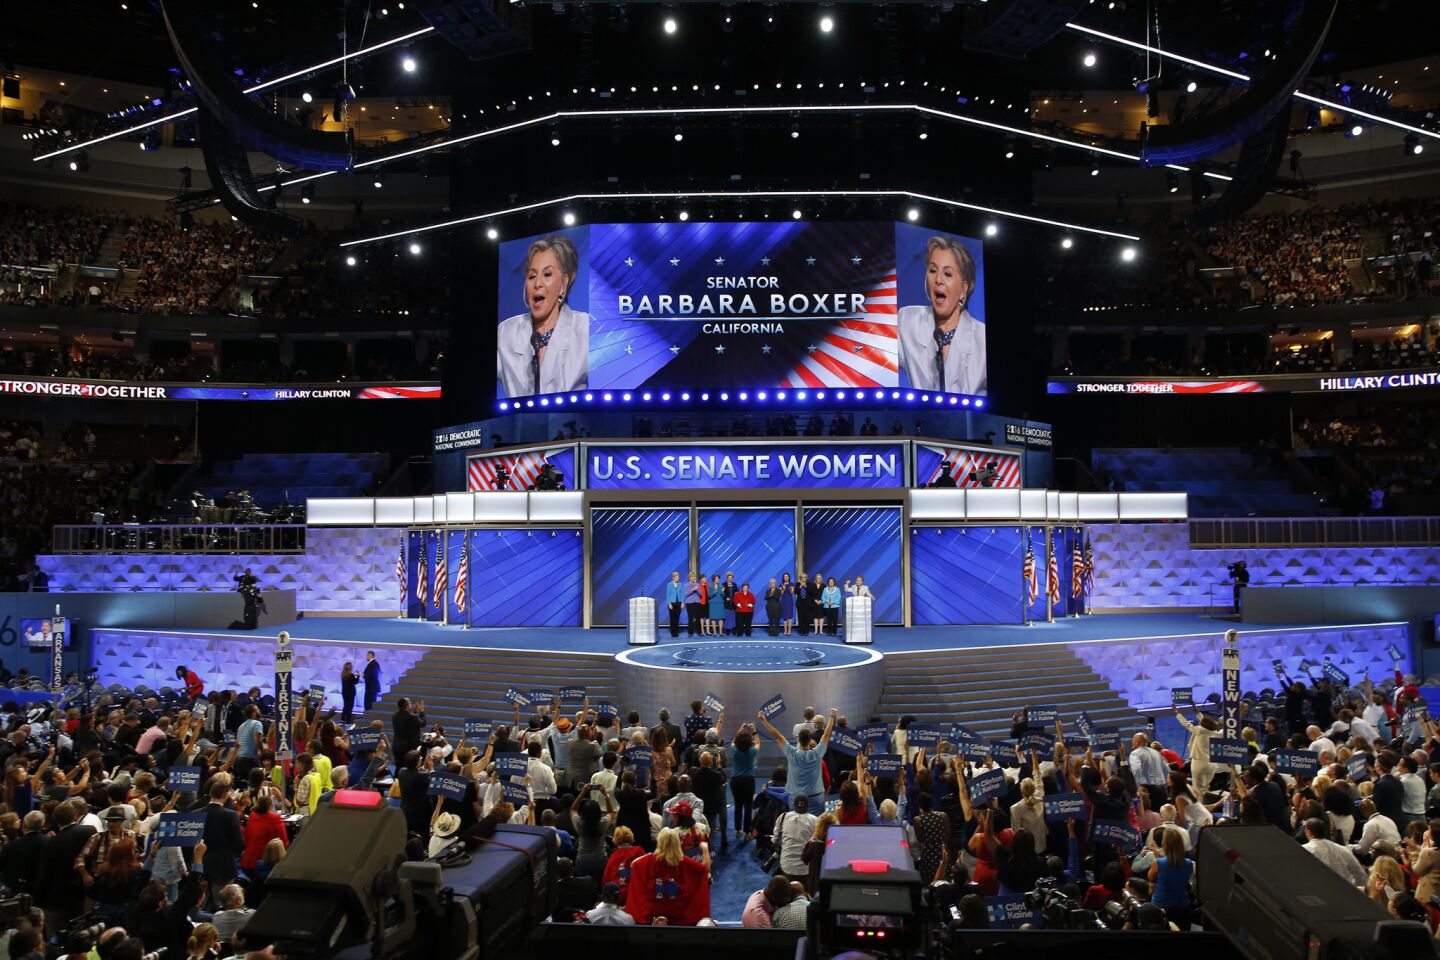 Senator Barbara Boxer speaks to the delegates as one of the other U.S. Senate Women on the final night of the Democratic National Convention in Philadelphia.